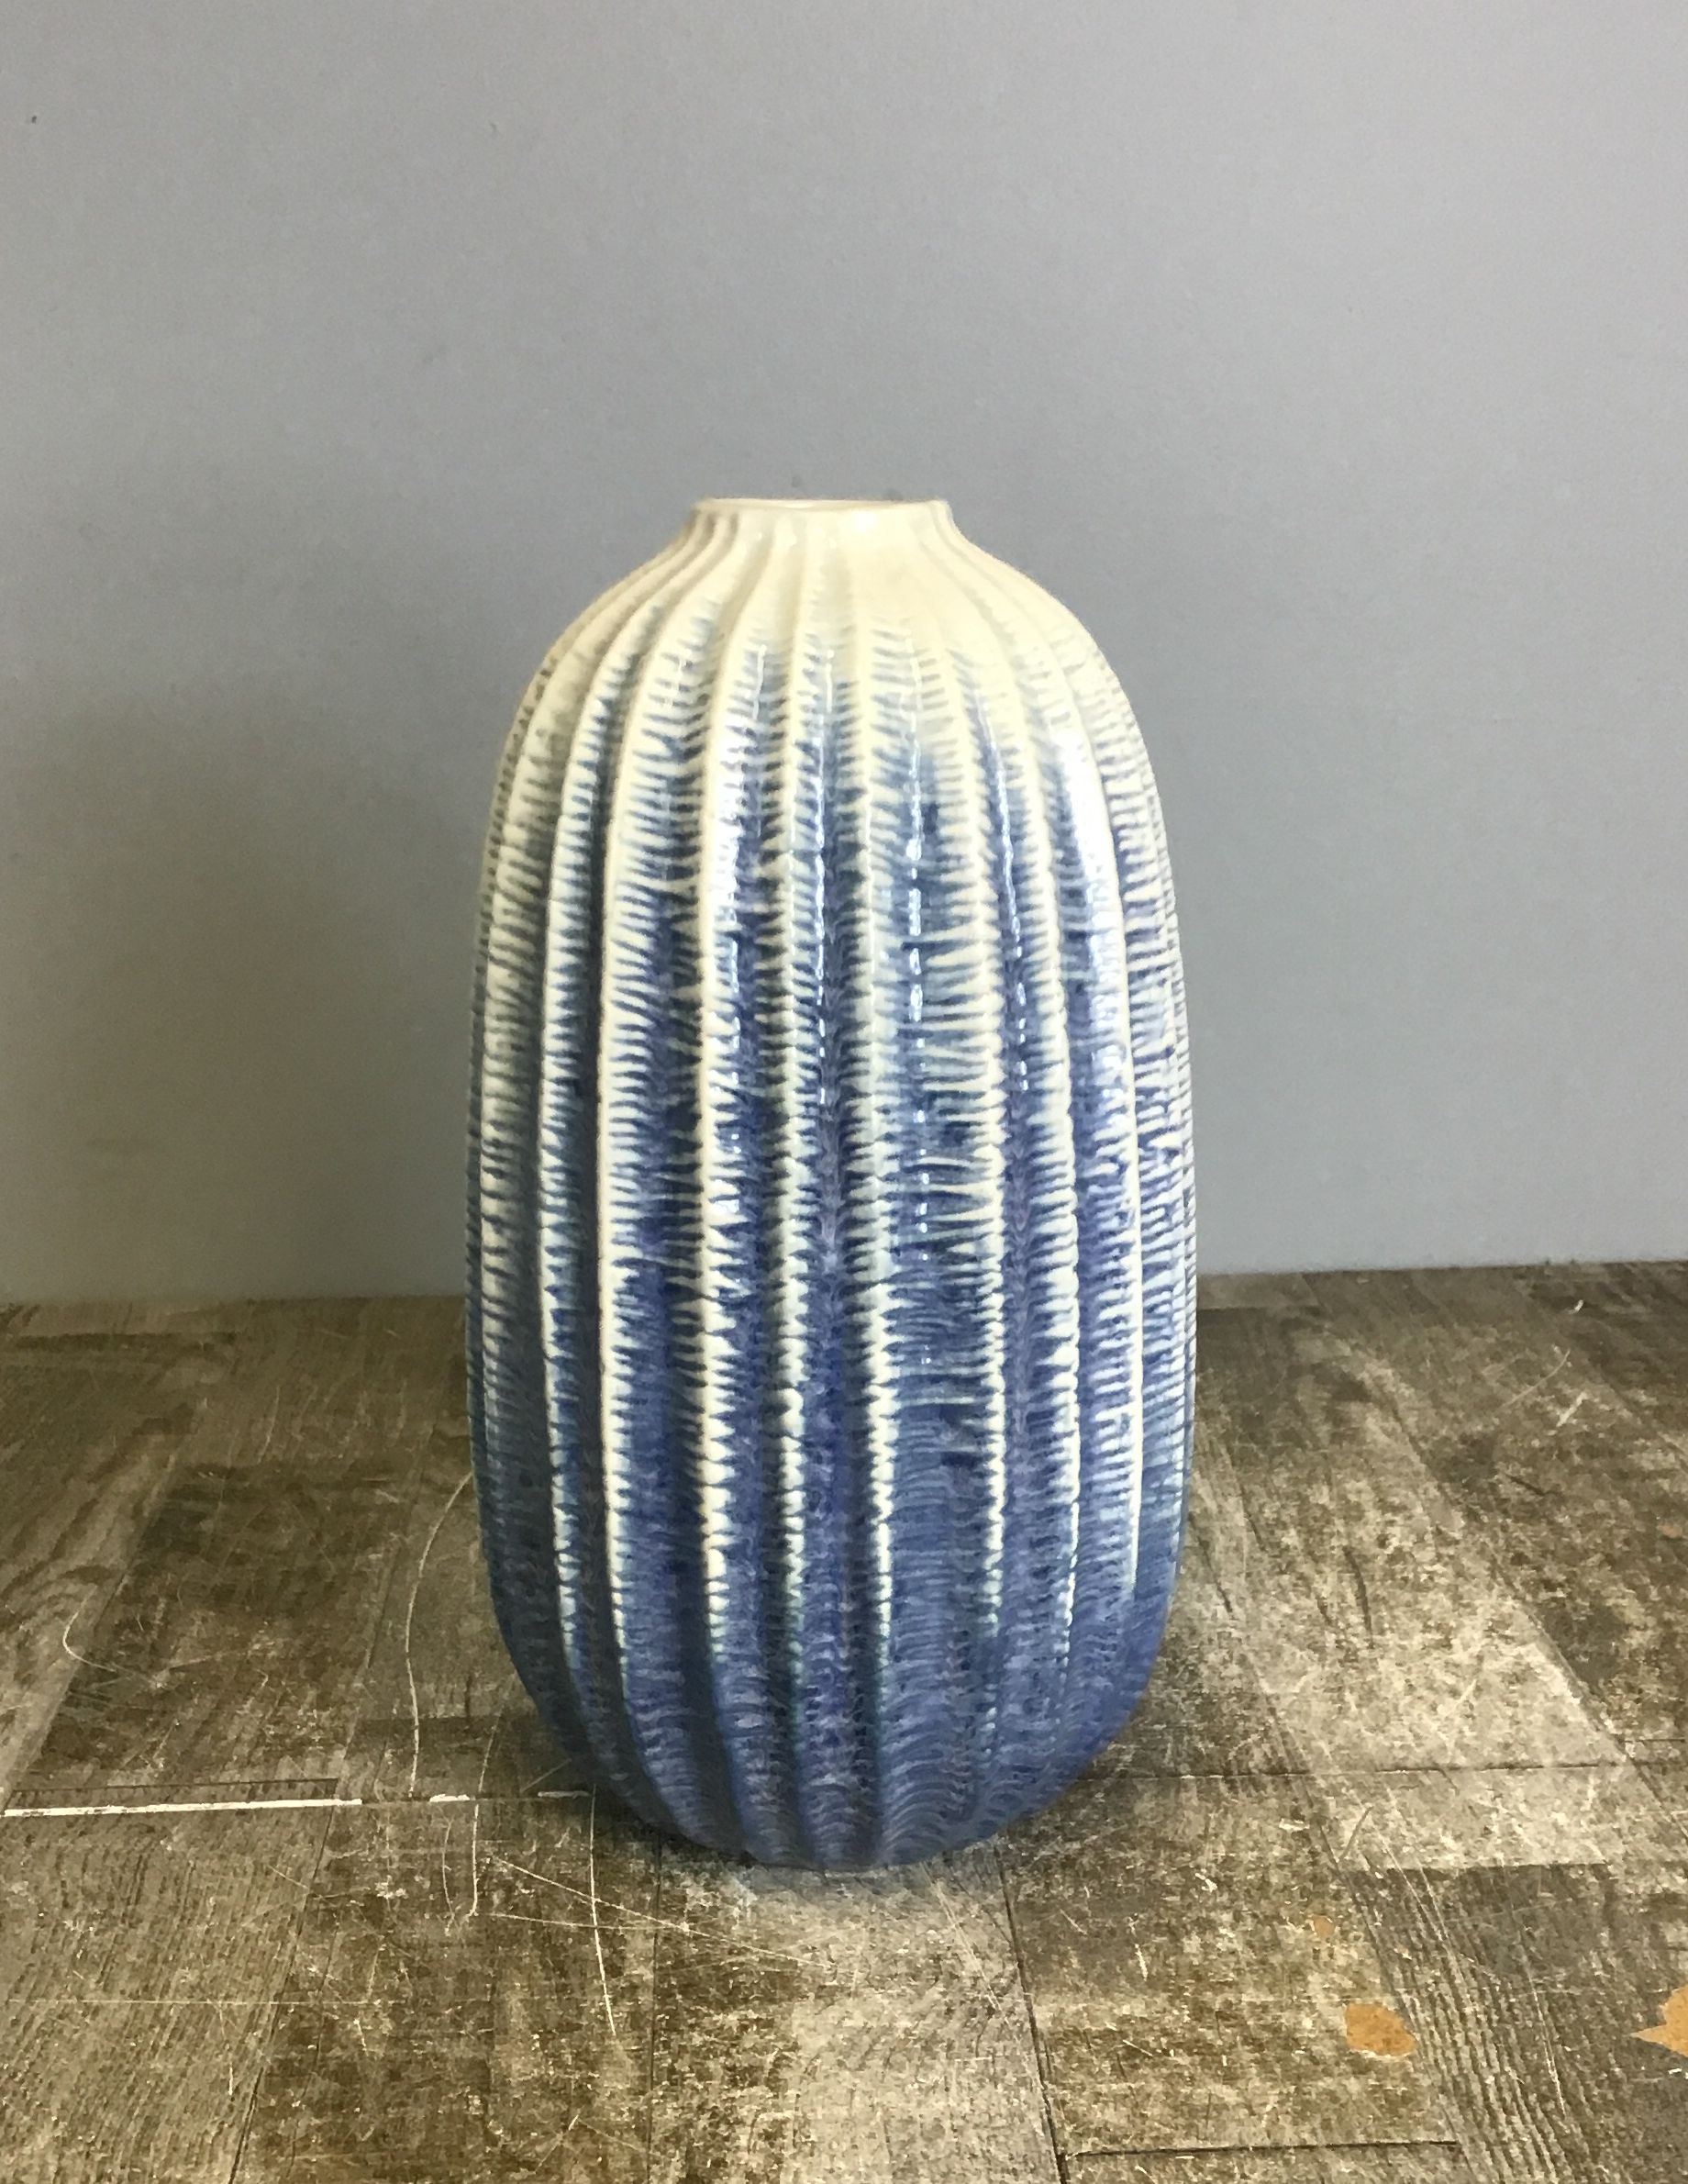 Tozai Textured Large Handmade Zig Zag Blue Ombre Porcelain Vase by Tozai Home